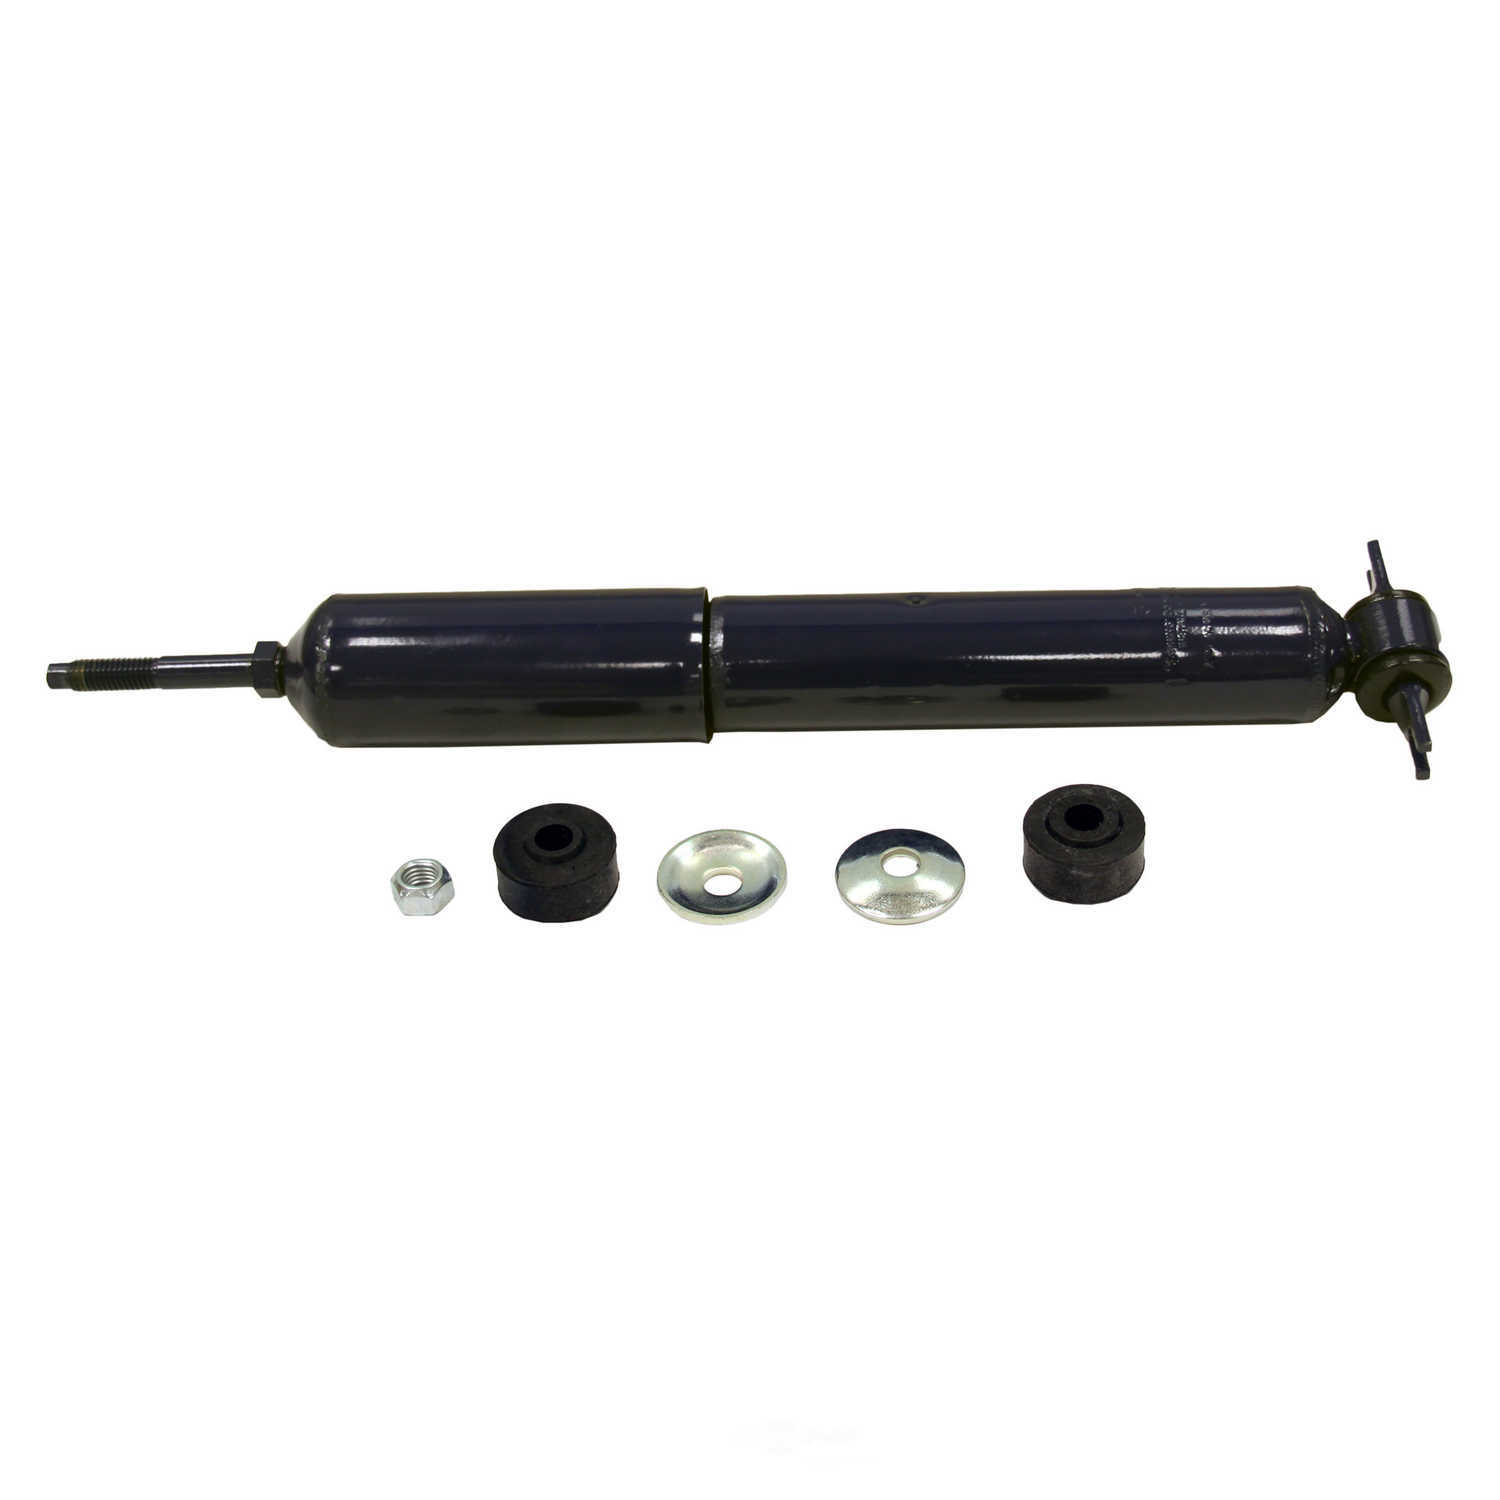 MONROE SHOCKS/STRUTS - Monro-Matic Plus Shock Absorber (With ABS Brakes, Front) - MOE 32400